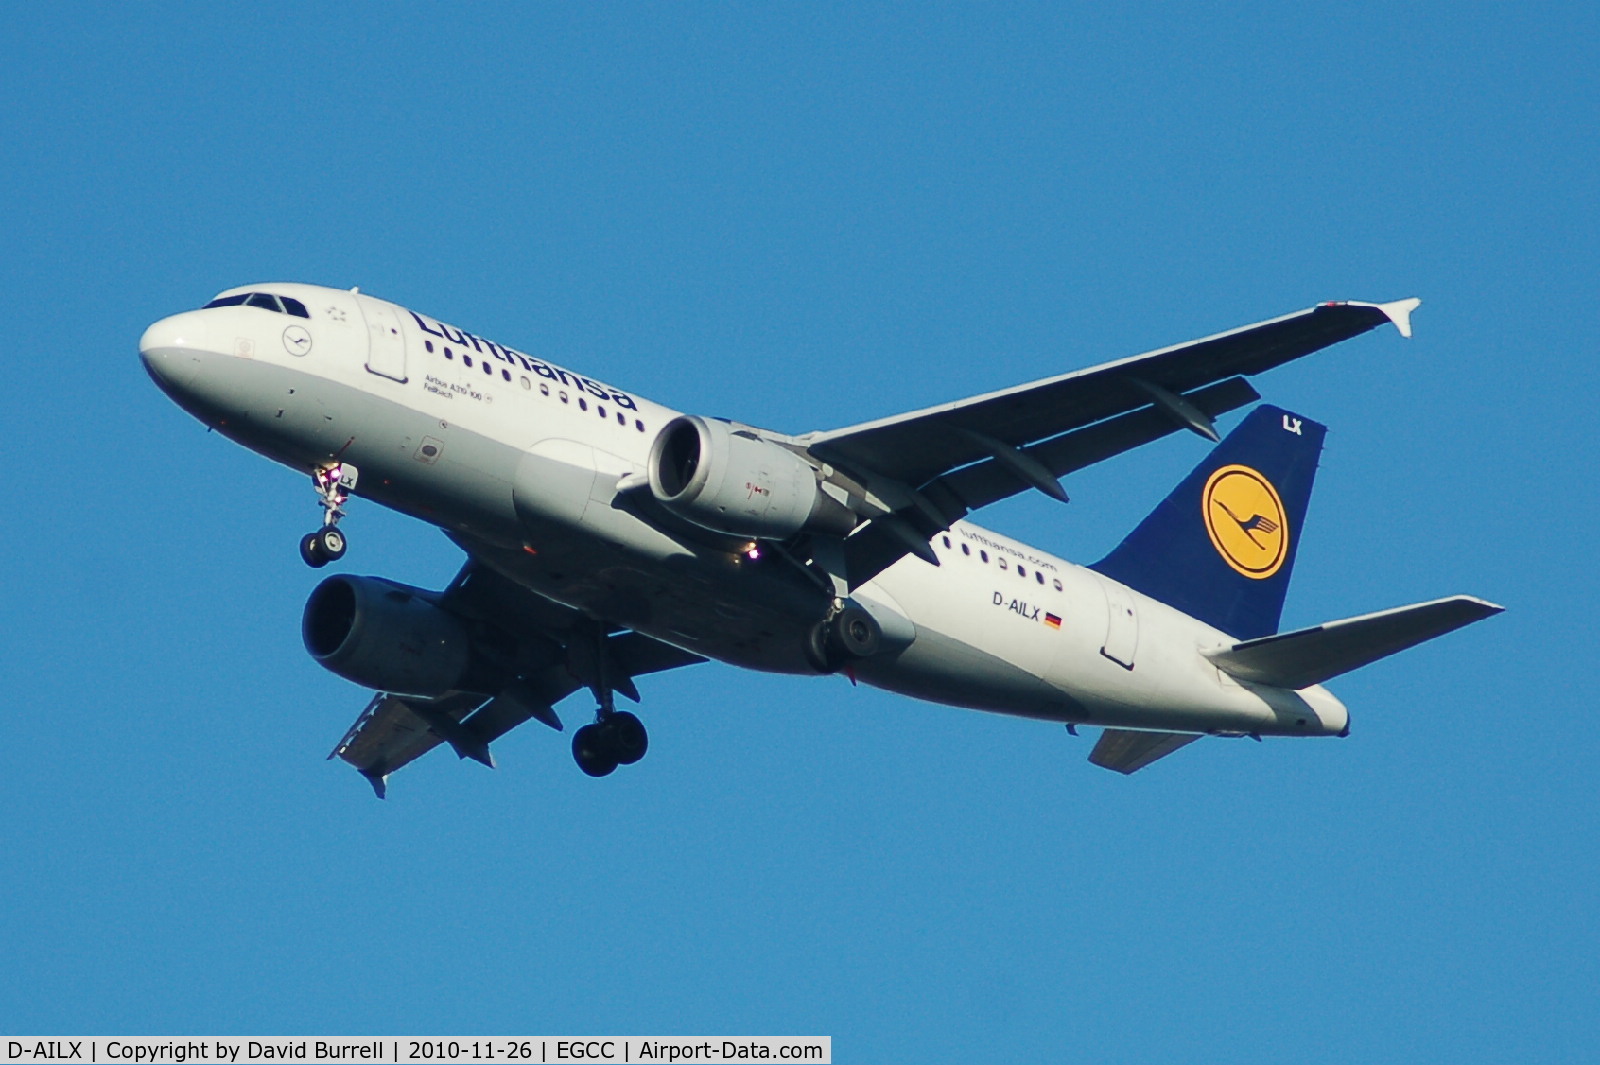 D-AILX, 1998 Airbus A319-114 C/N 860, Lufthansa D-AILX Airbus A319-114 on approach to Manchester Airport